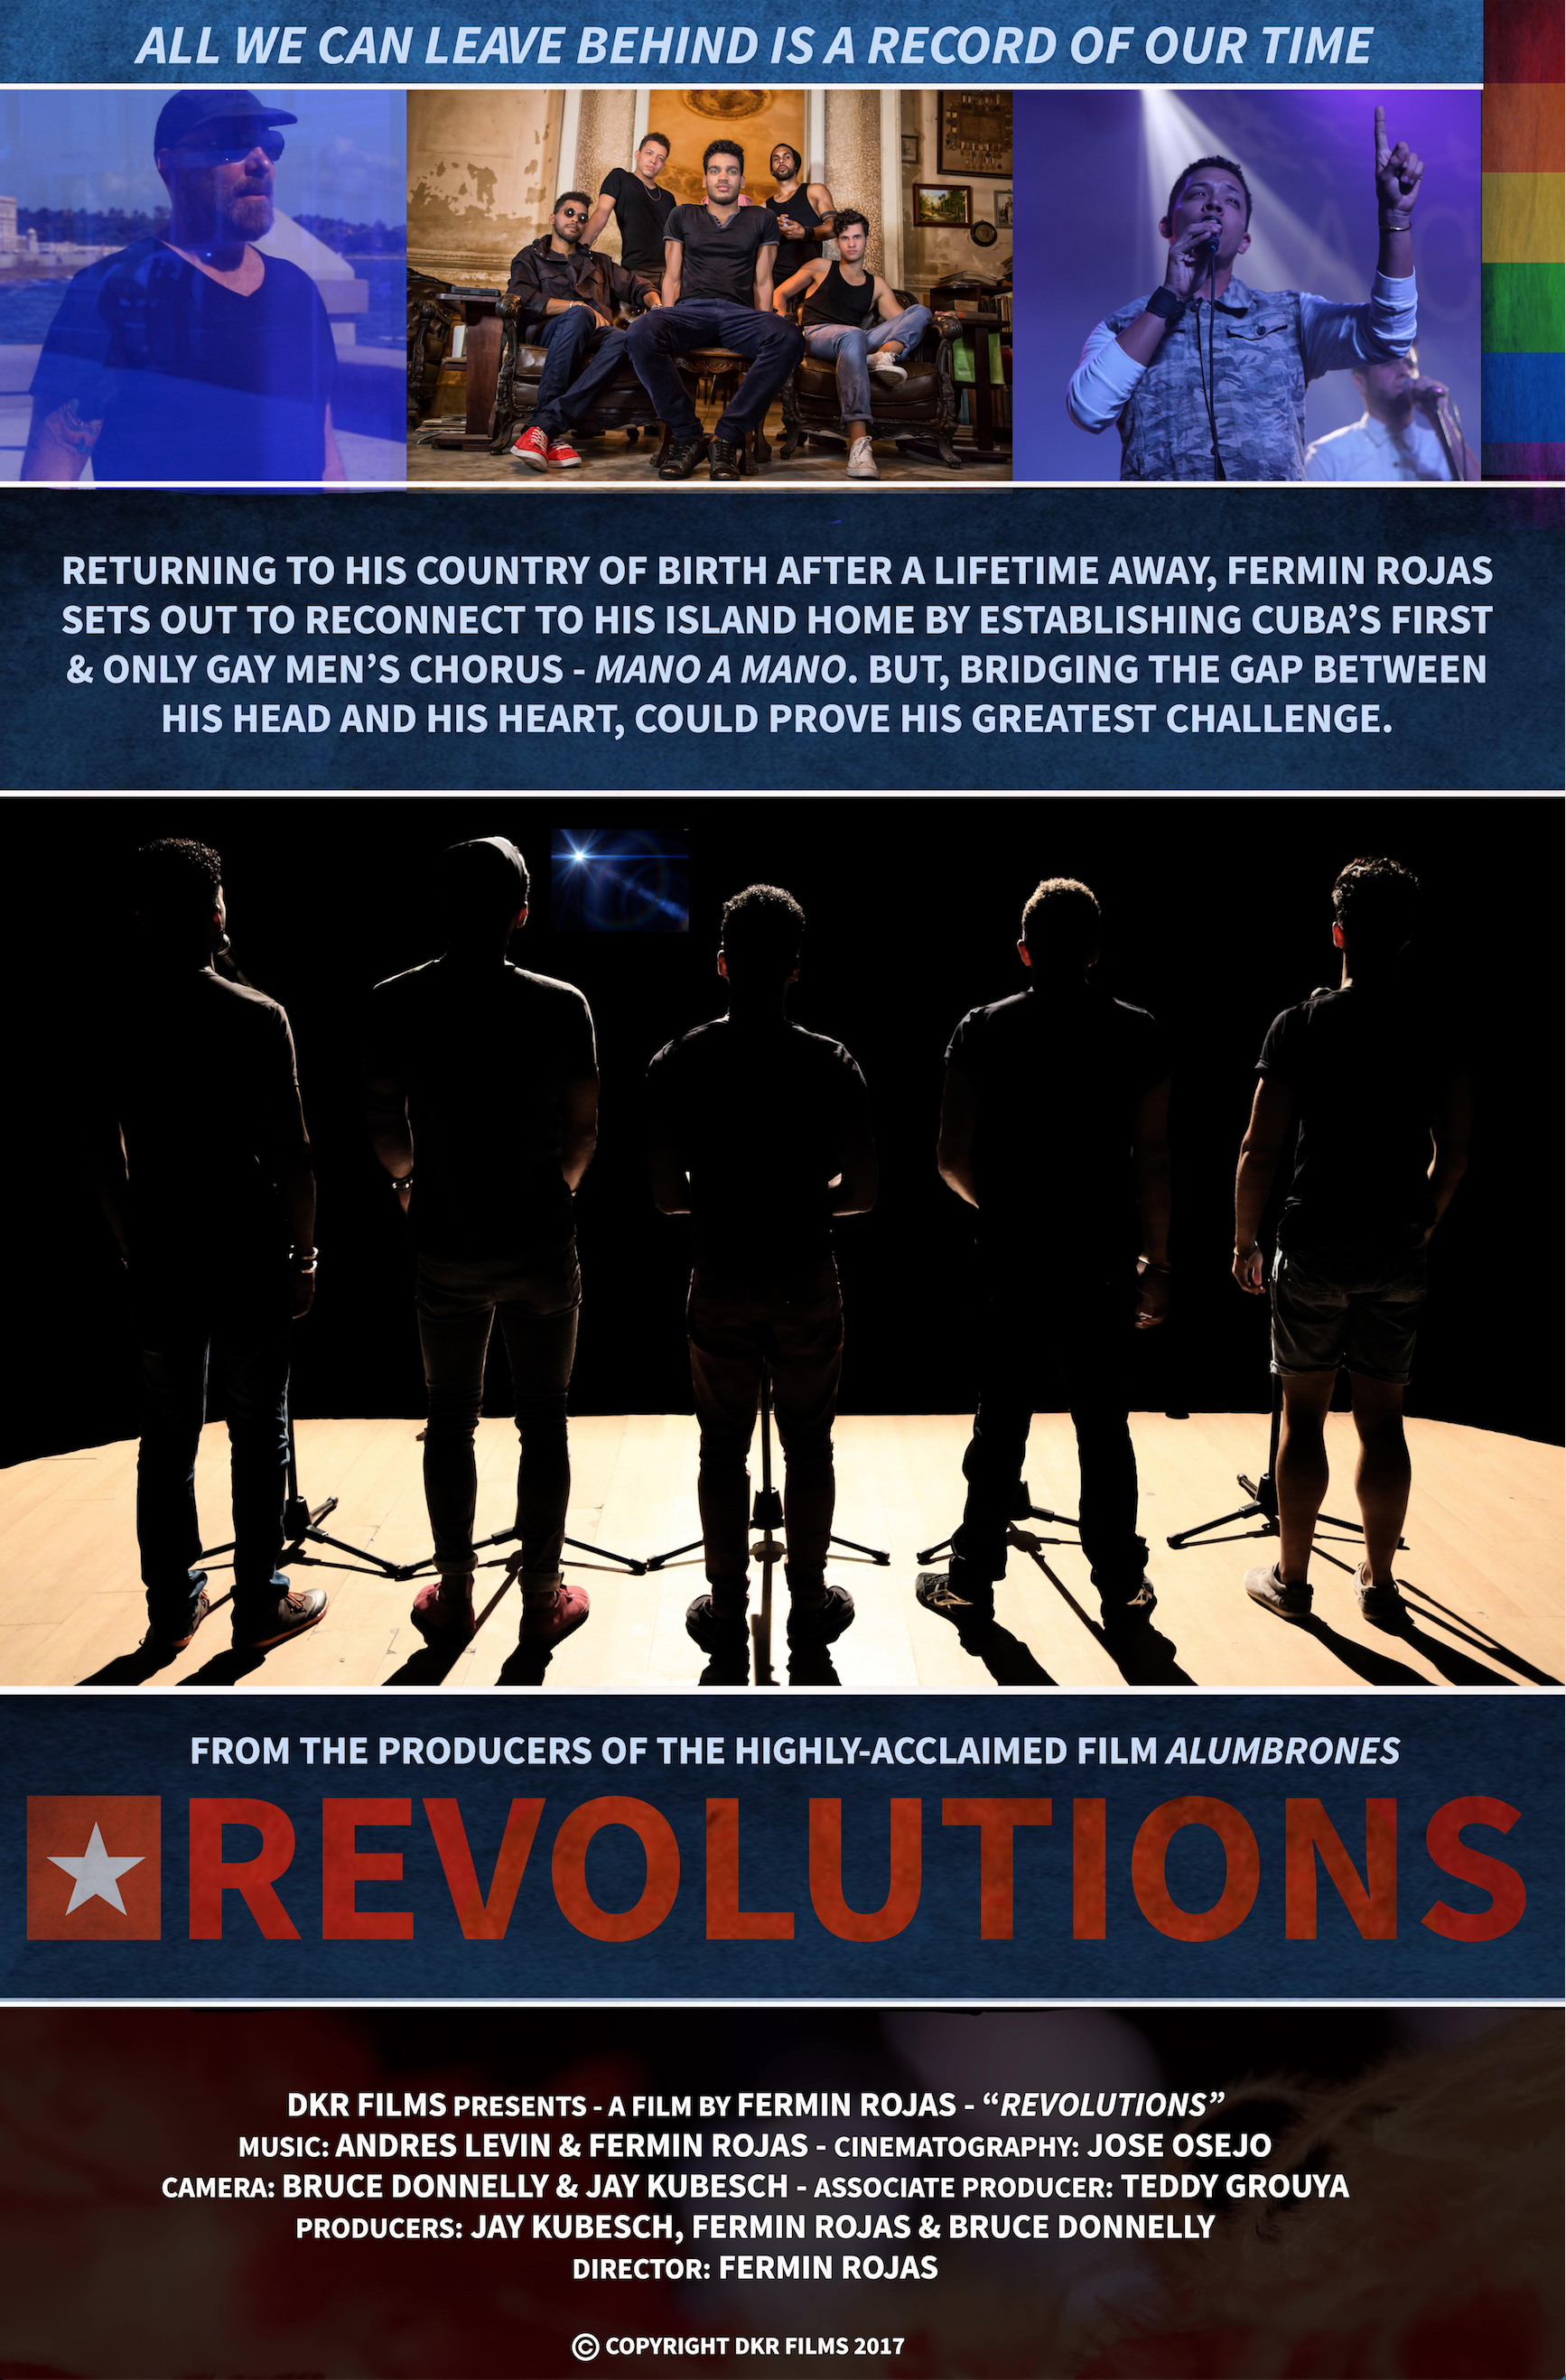 REVOLUTIONS - DOCUMENTARY FEATURE